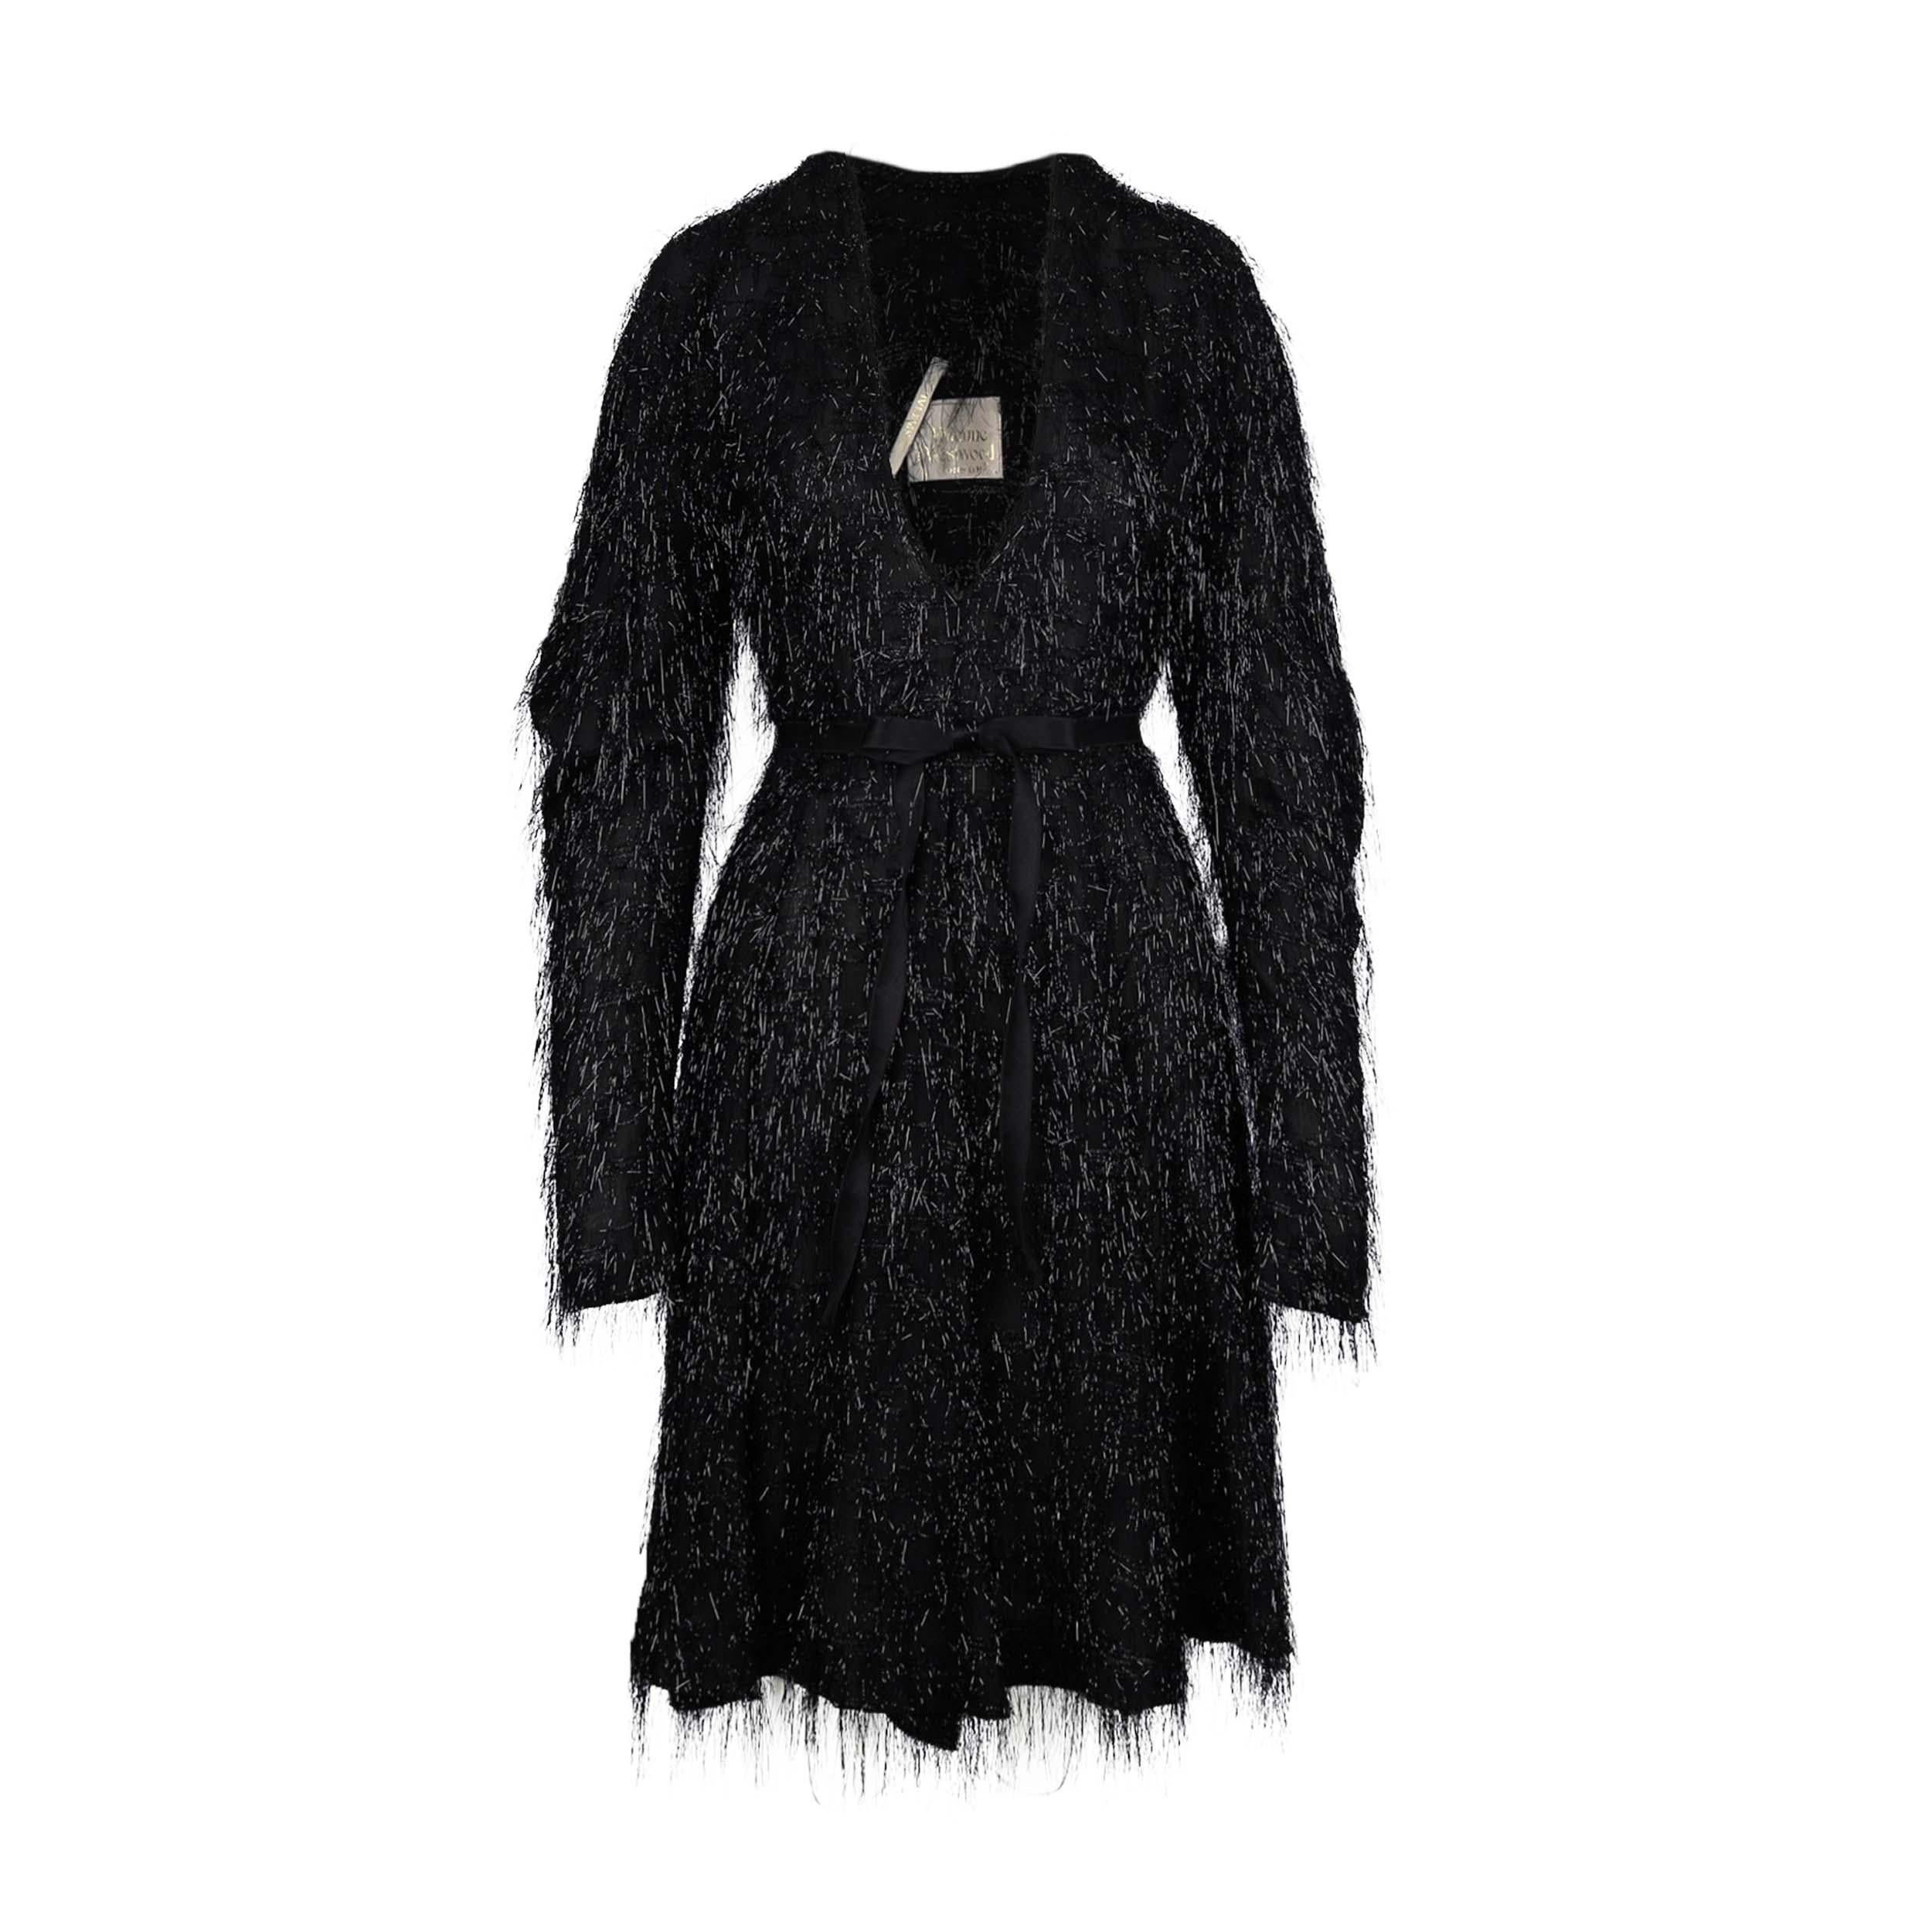 Vivienne Westwood Black Dress with Glitter Fringes- '10s In Excellent Condition For Sale In Milano, IT